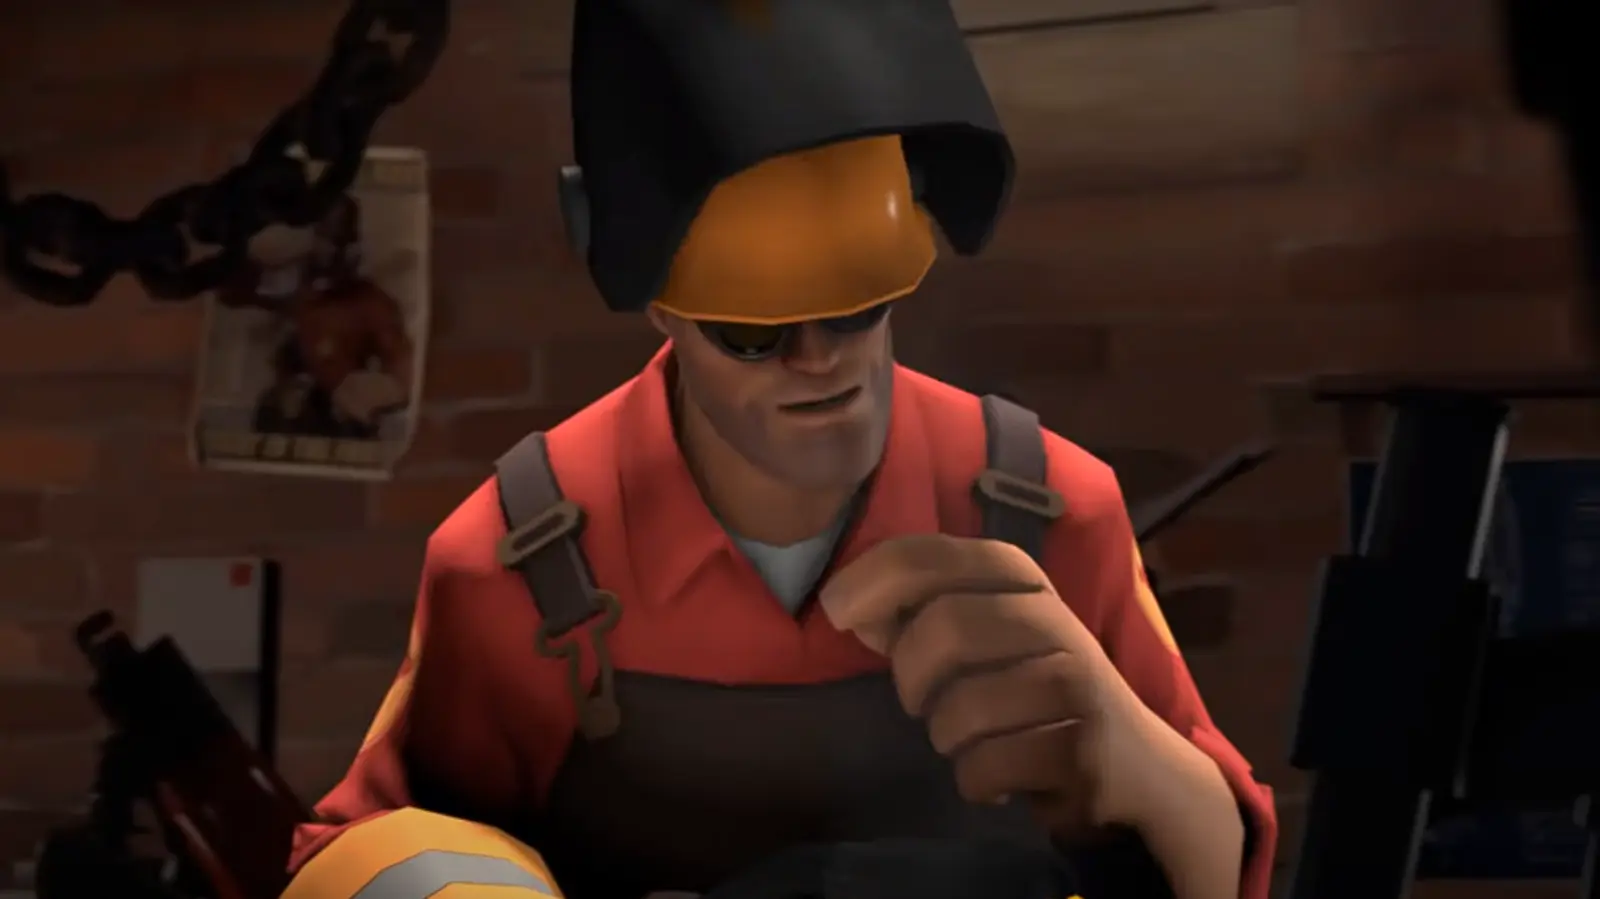 Team Fortress 2: Veteran players demand fixes by trending #SaveTF2